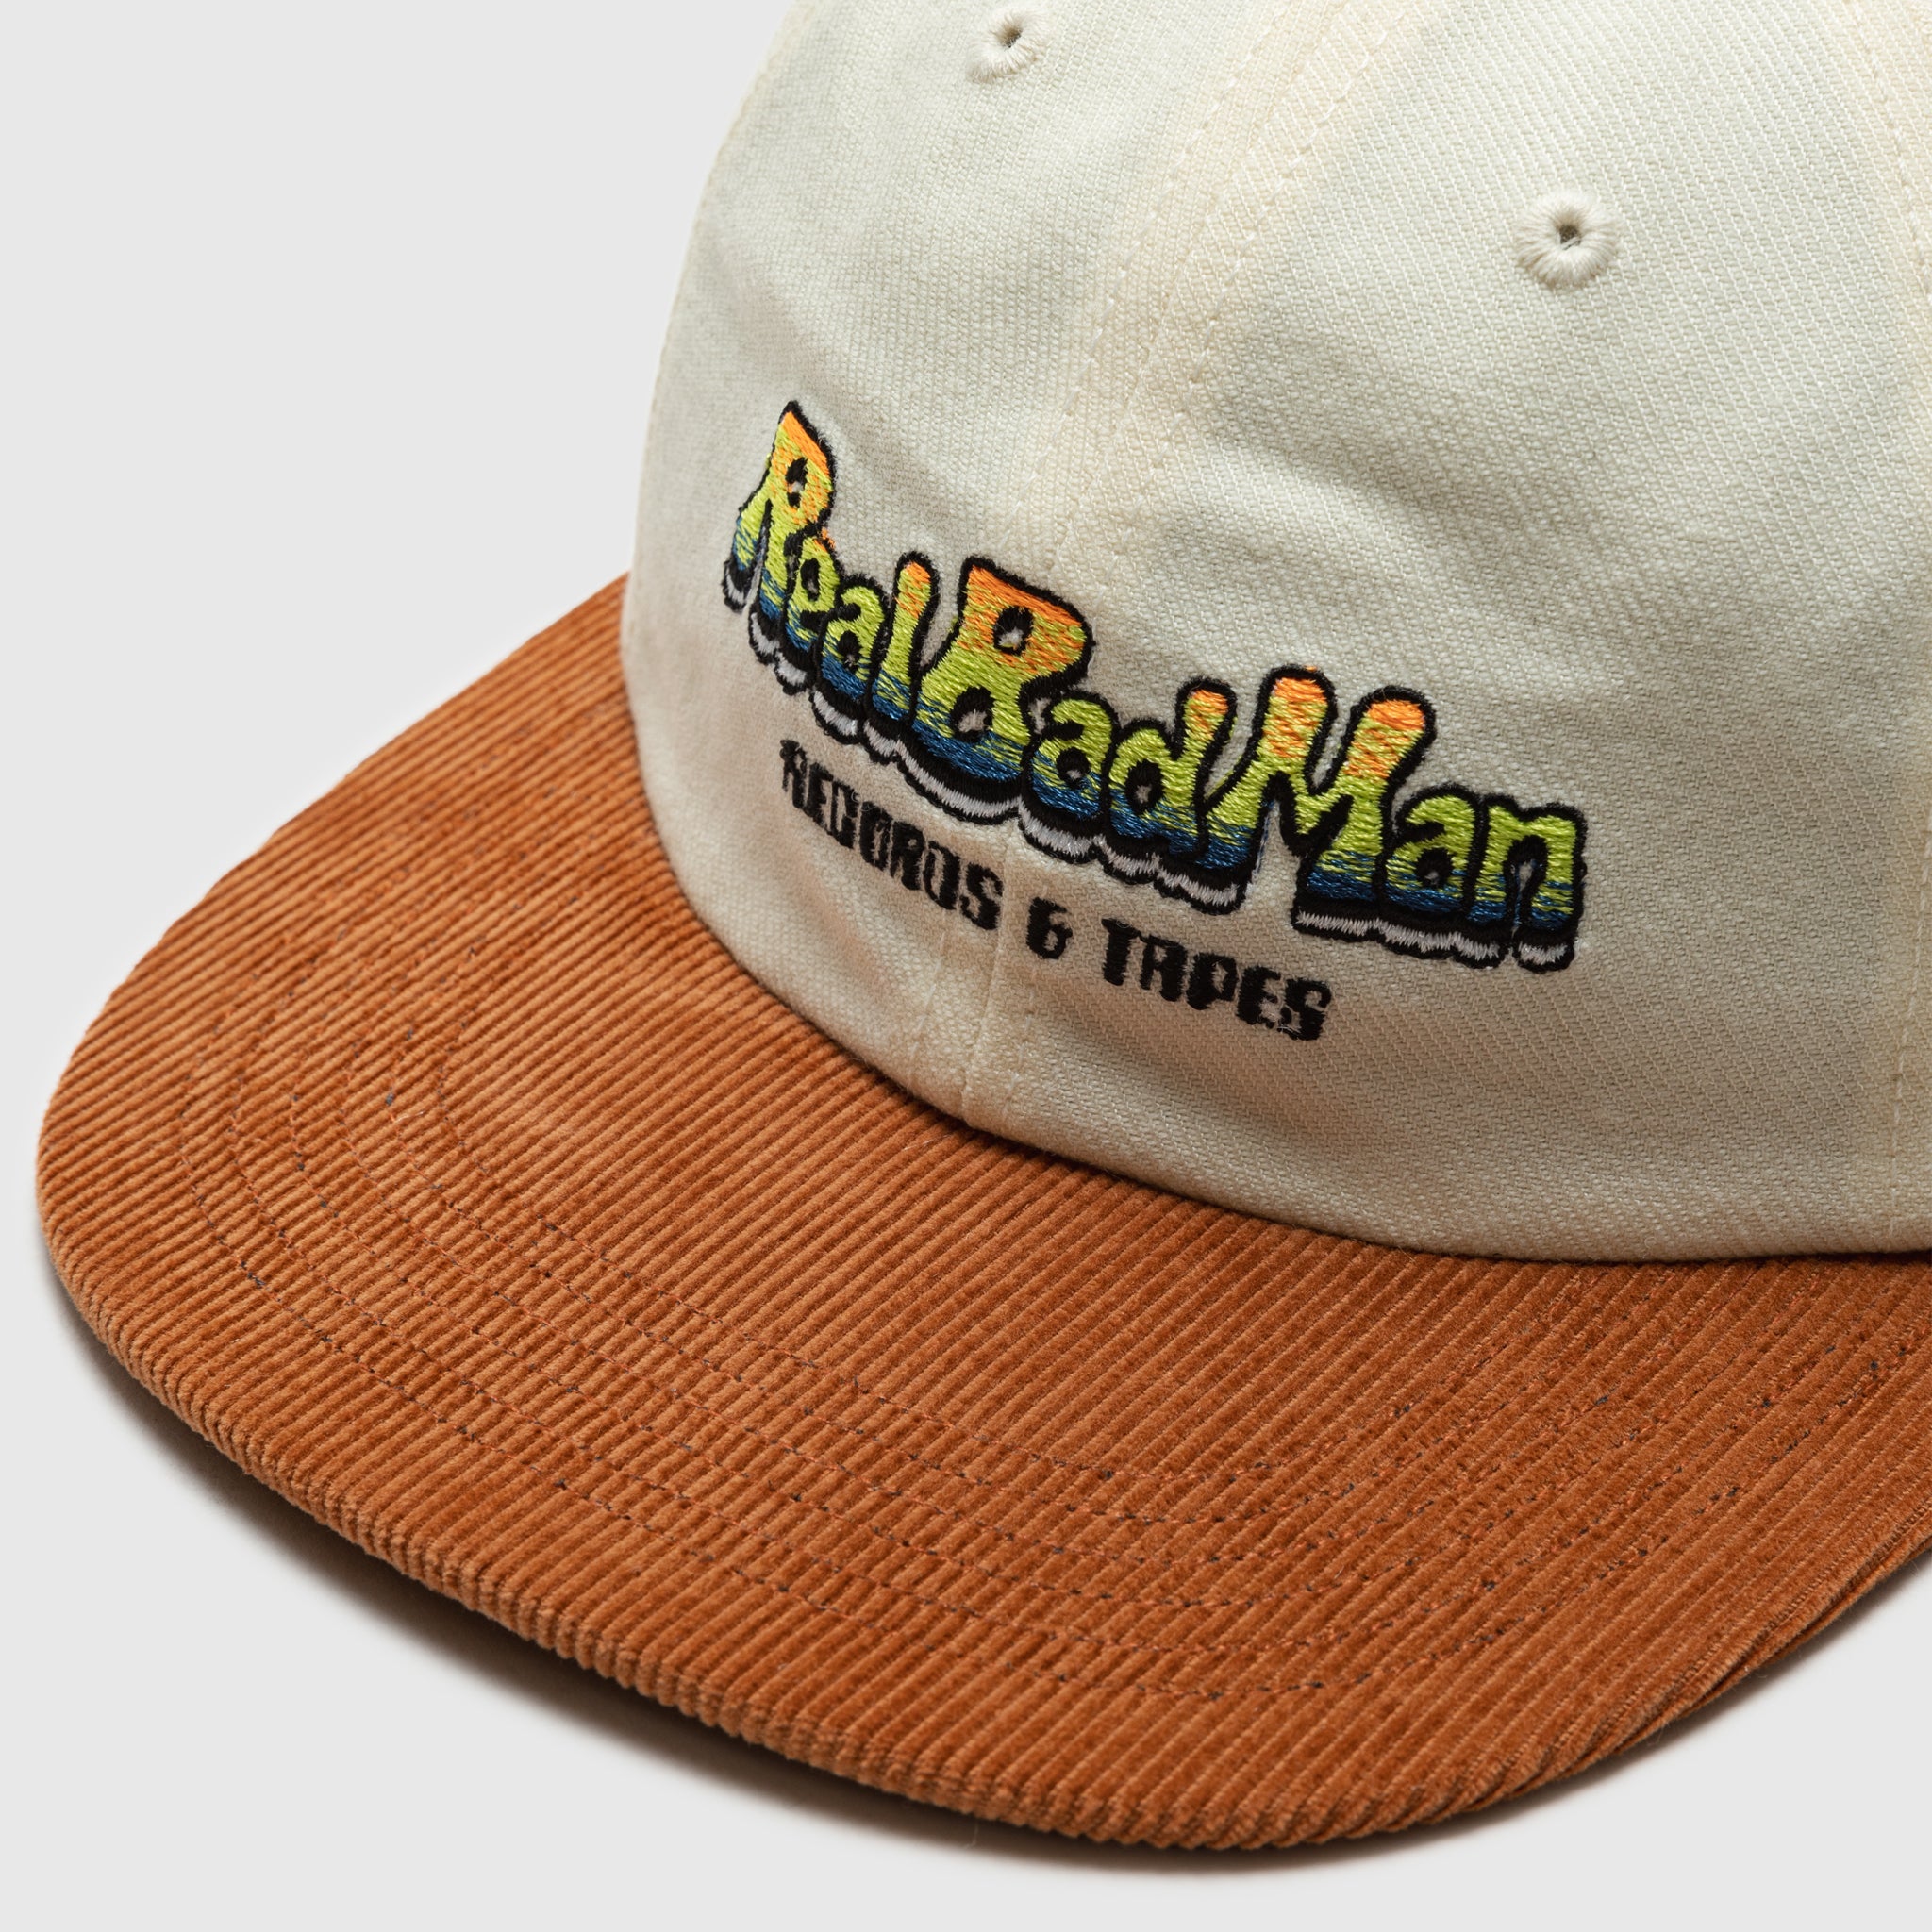 RECORDS & TAPES 6-PANEL CAP